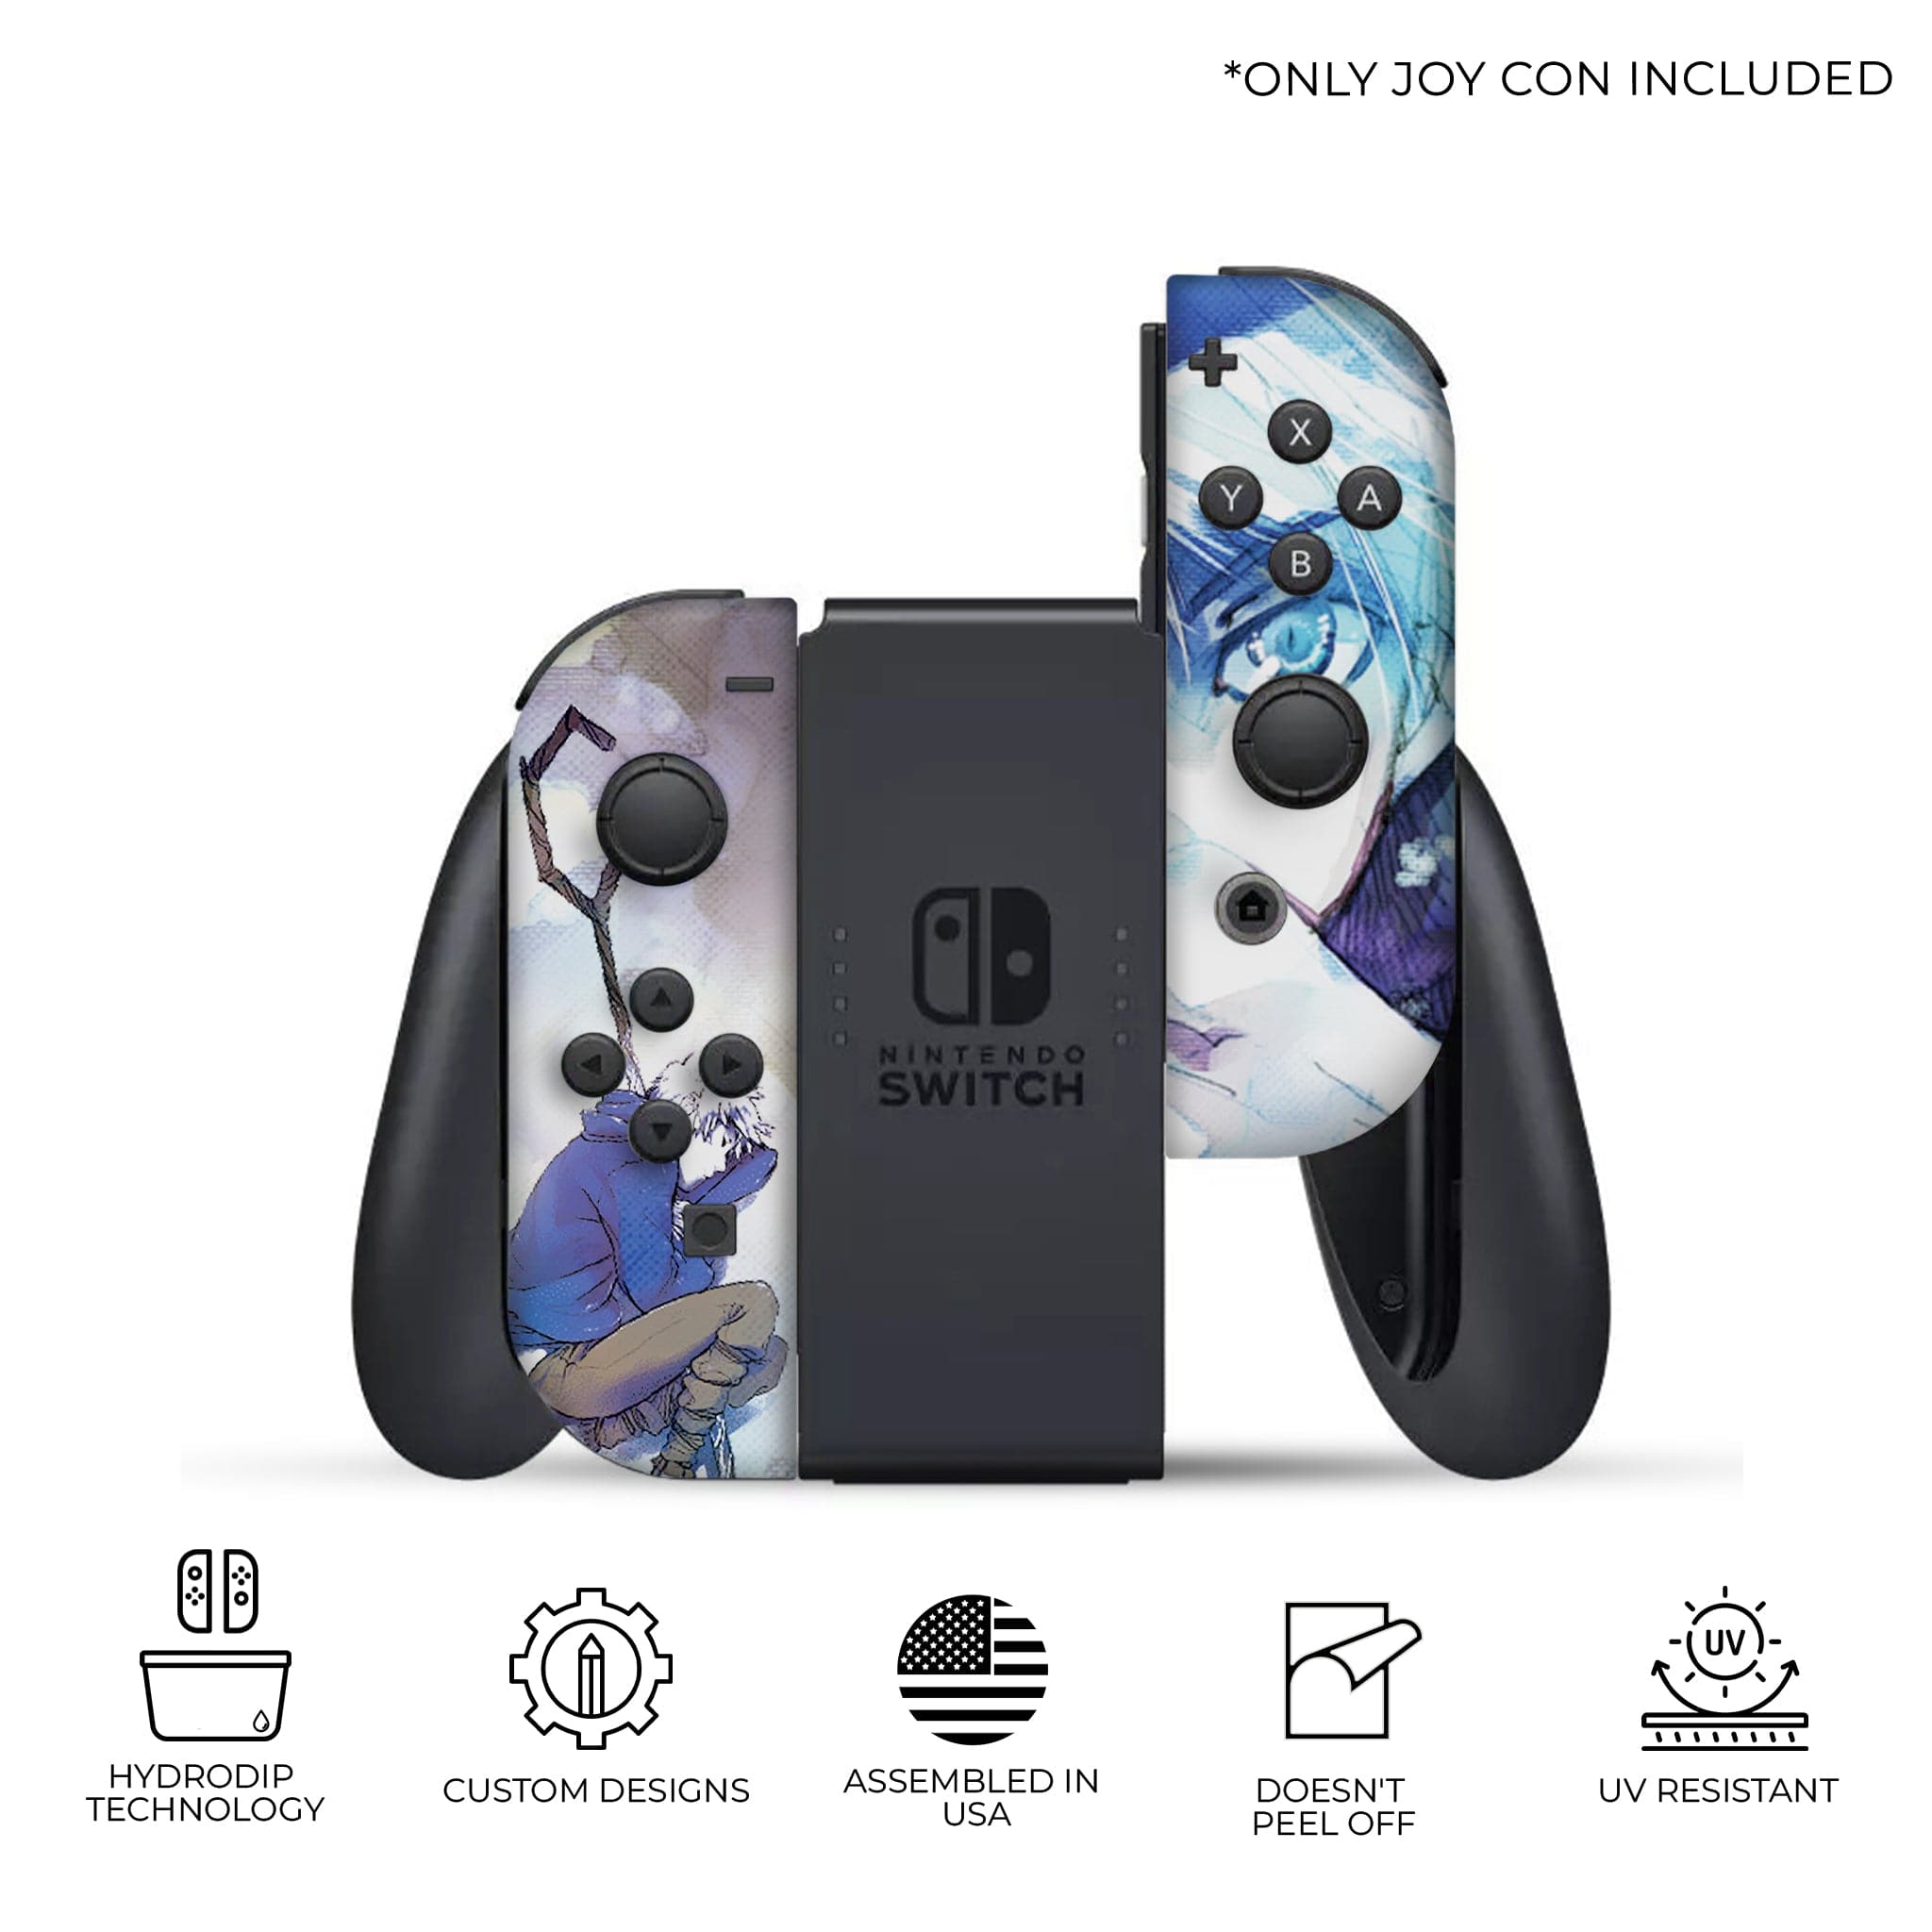 Jack Frost Joy-Con Left and Right Switch Controllers by Nintendo